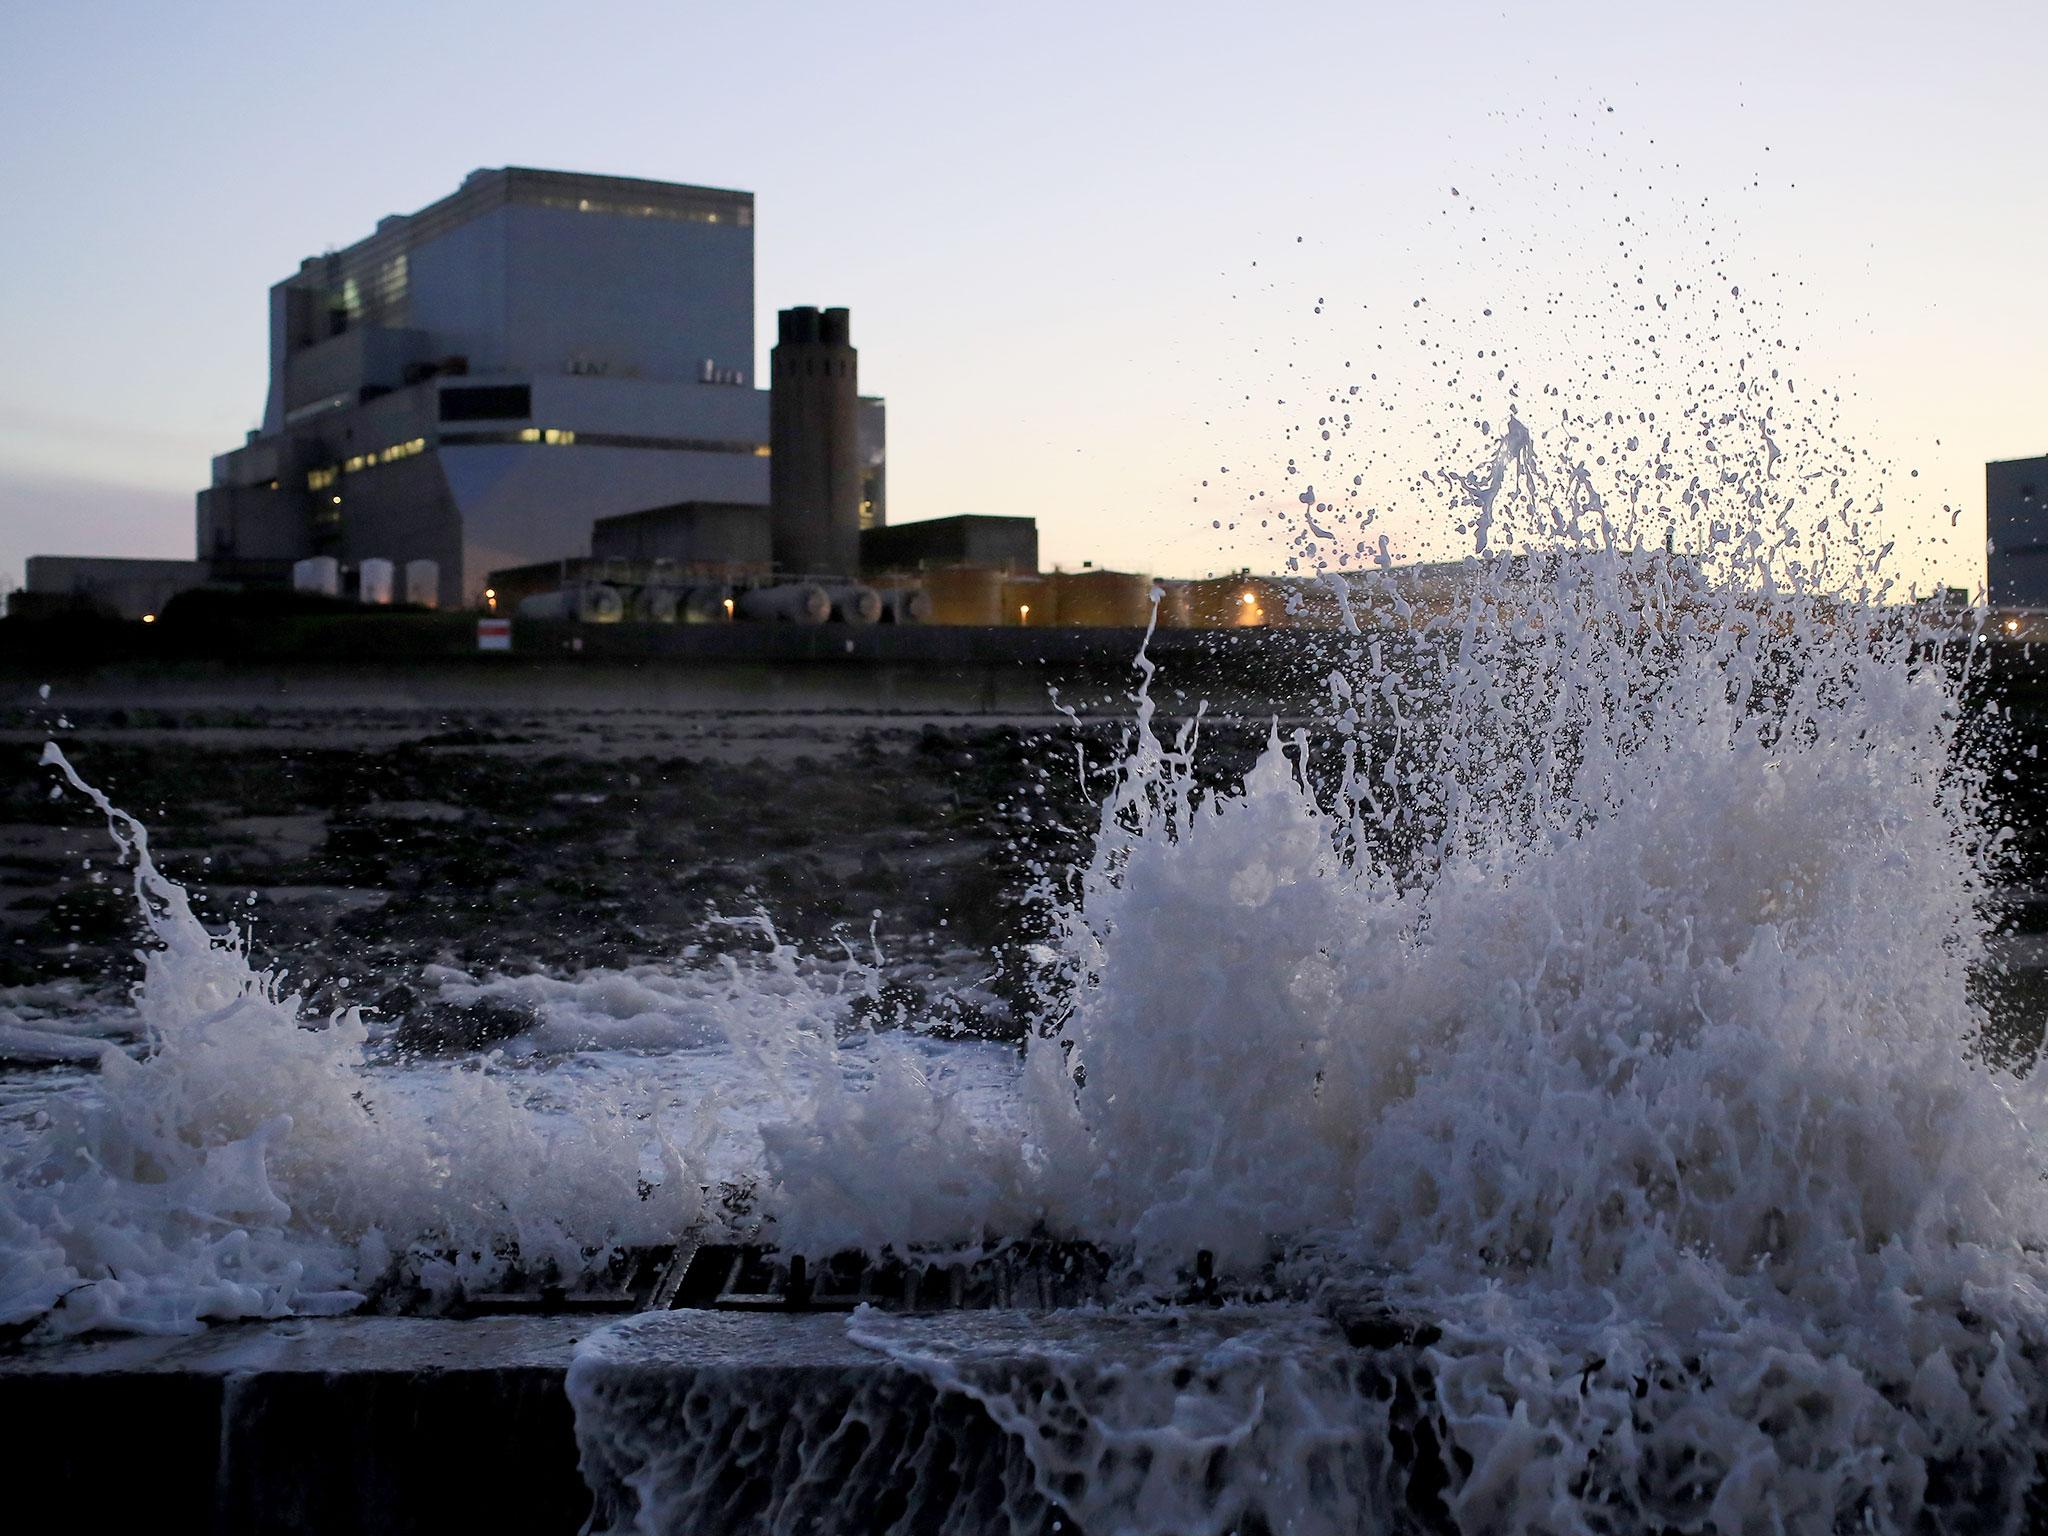 &#13;
A Chinese project at Hinkley power station is undergoing a security review &#13;